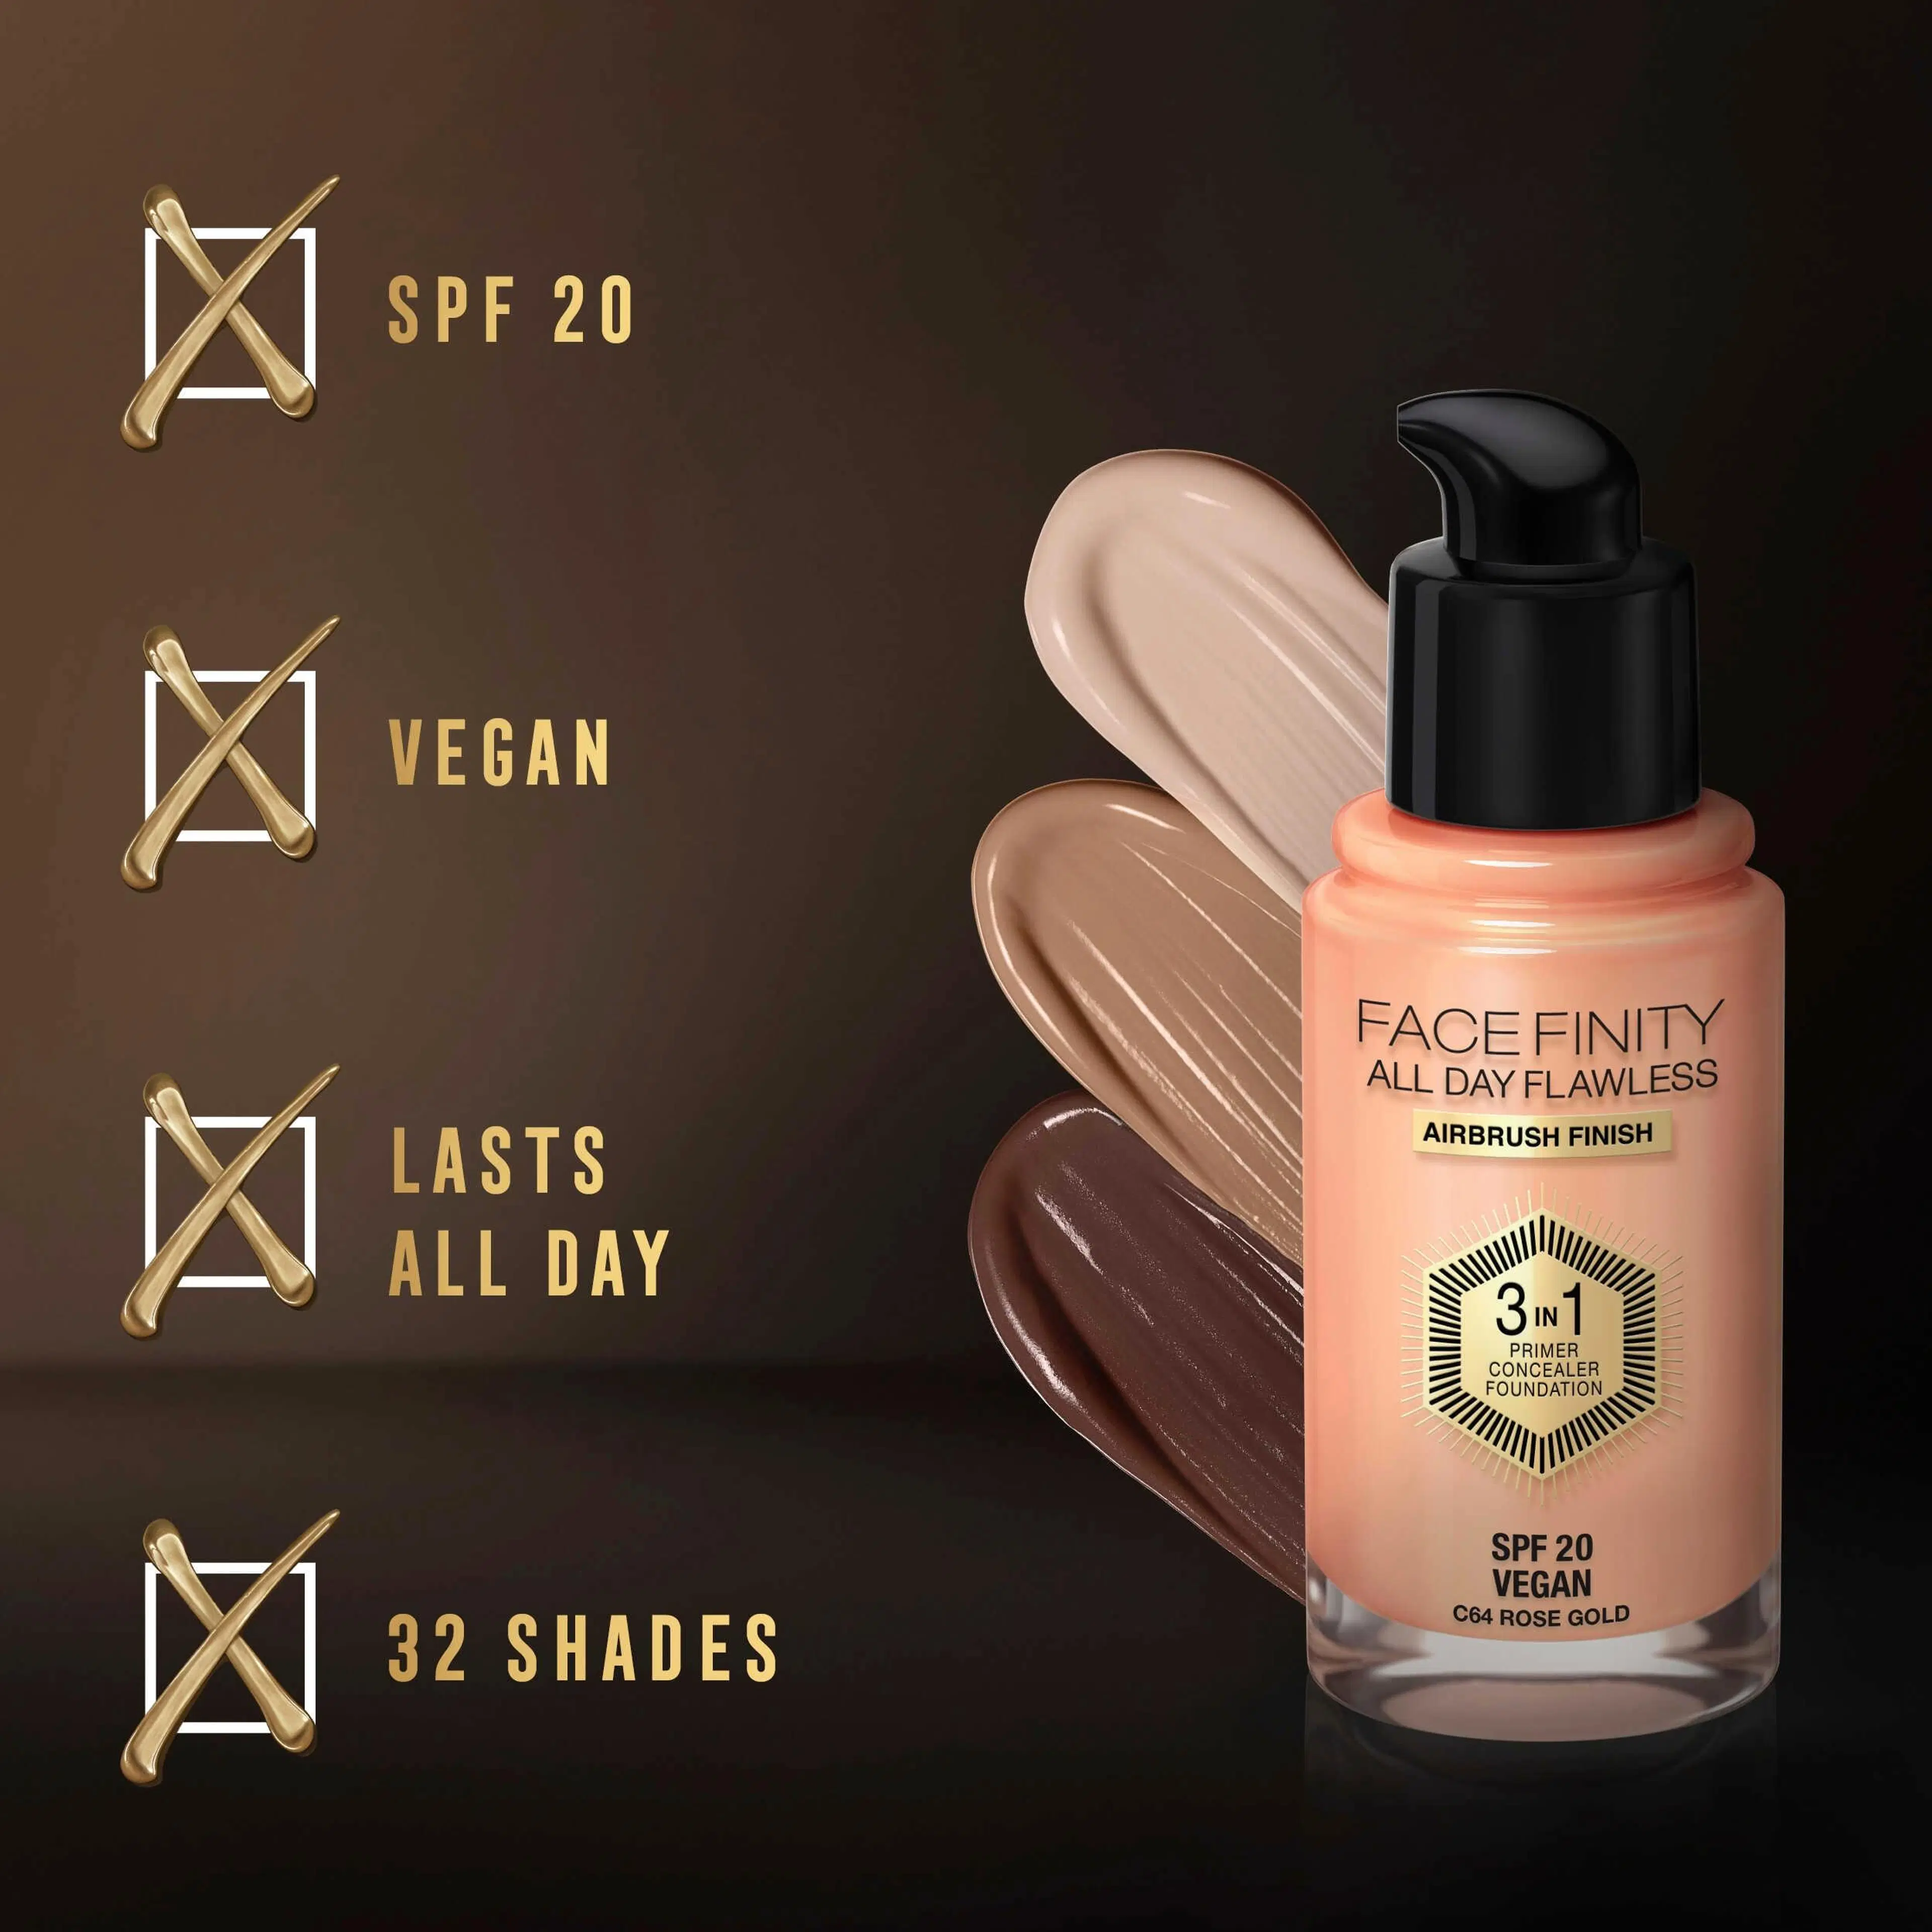 Max Factor Facefinity All Day Flawless 3in1 meikkivoide 30ml, 64 Rose Gold